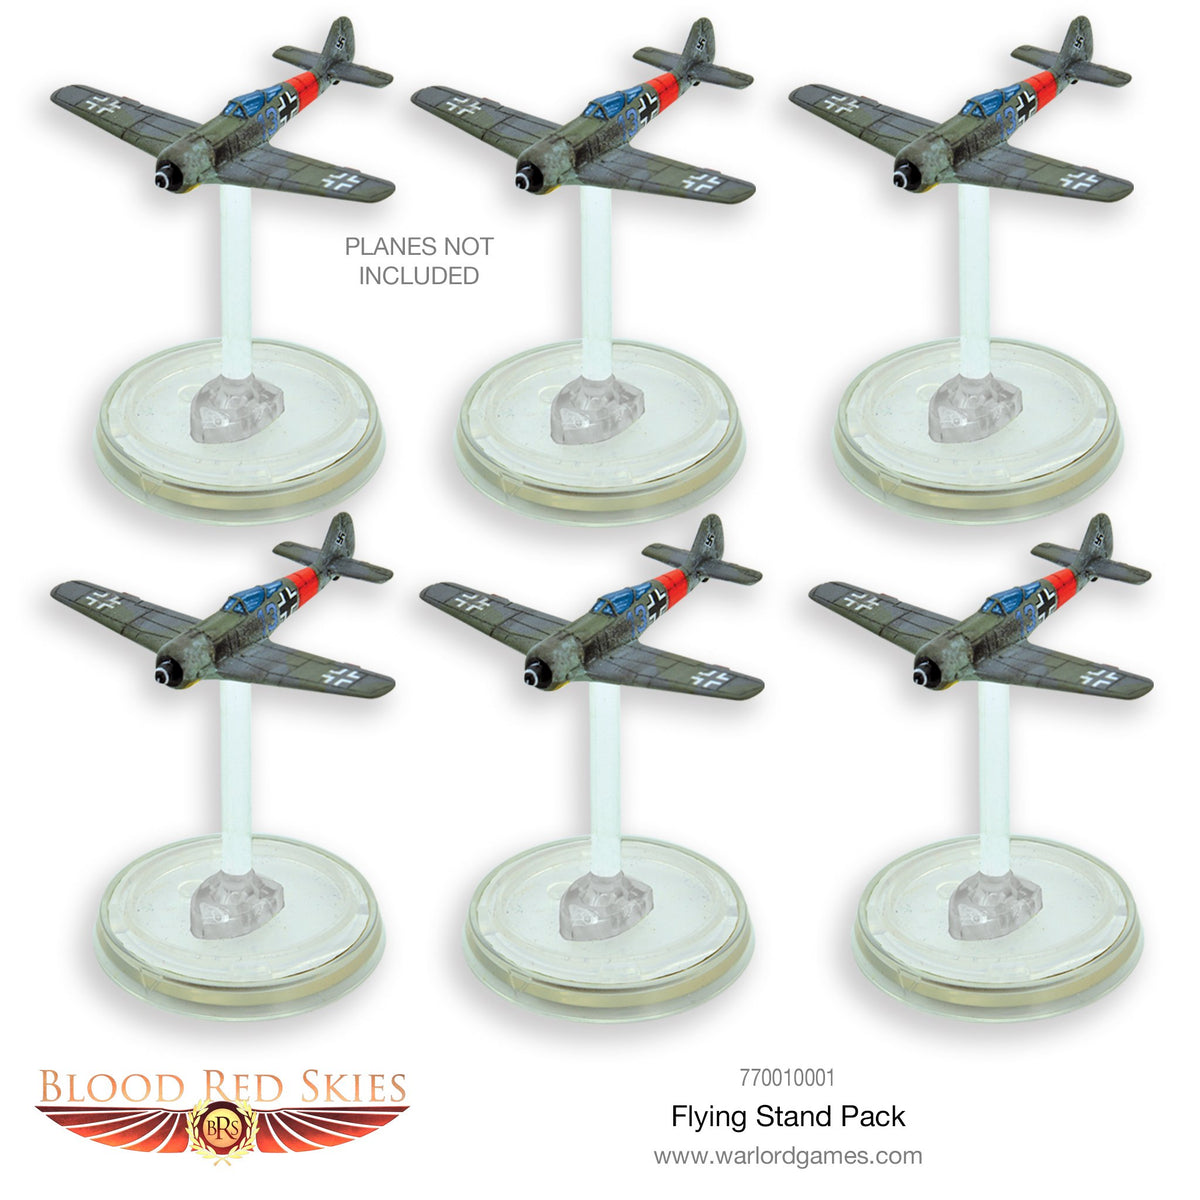 Blood Red Skies Advantage Flying Stand pack